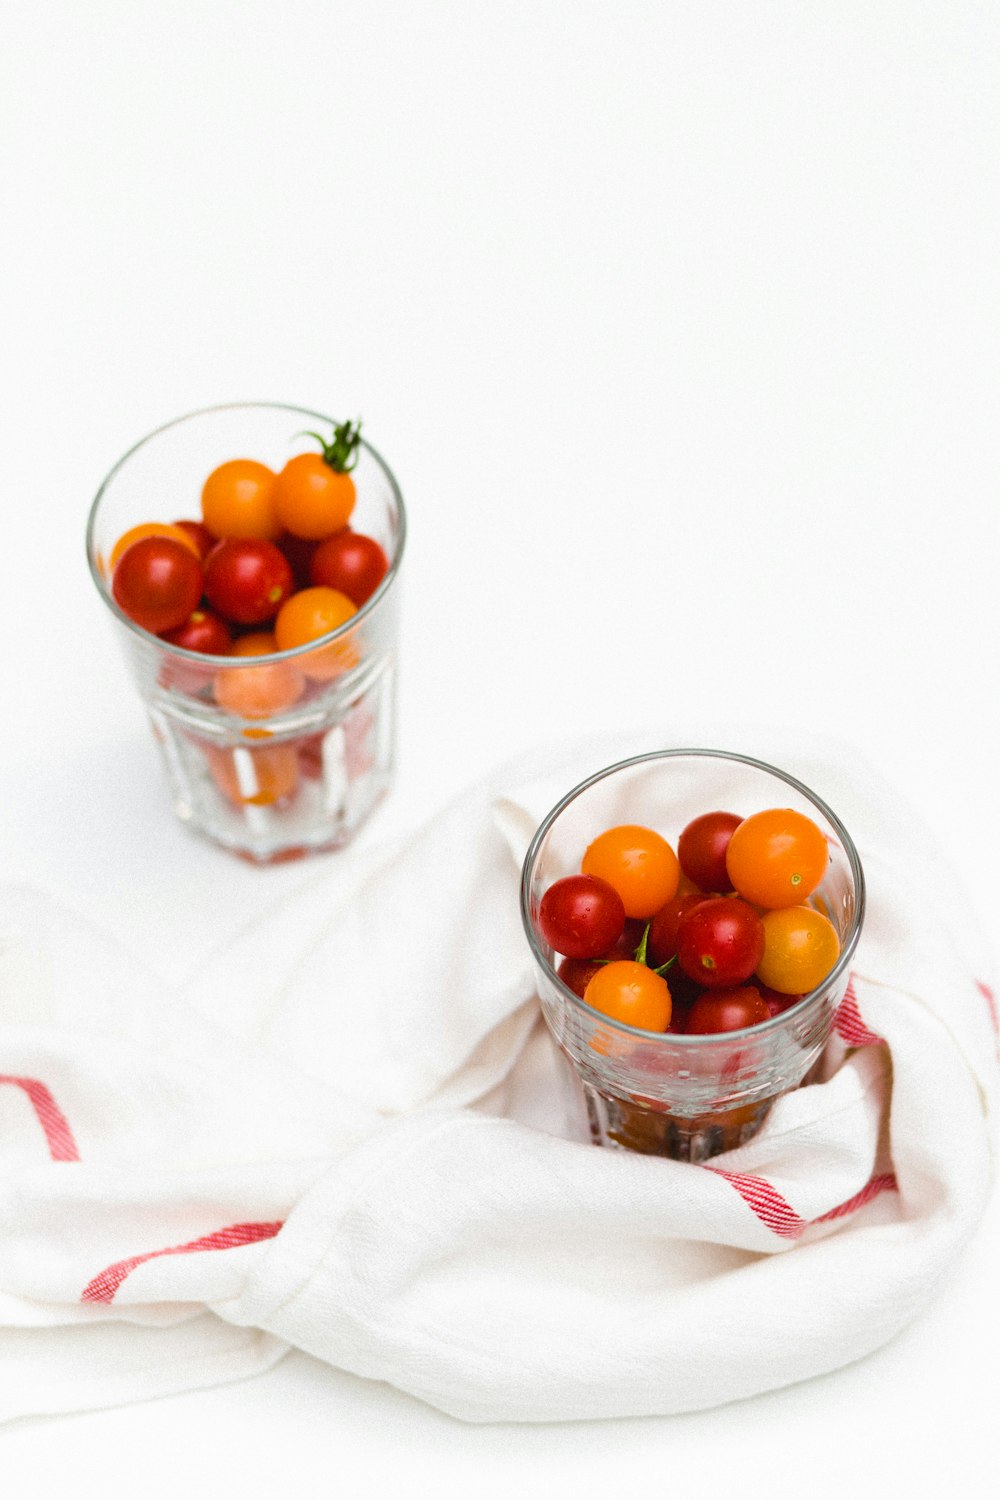 yellow and red tomatoes in glasses